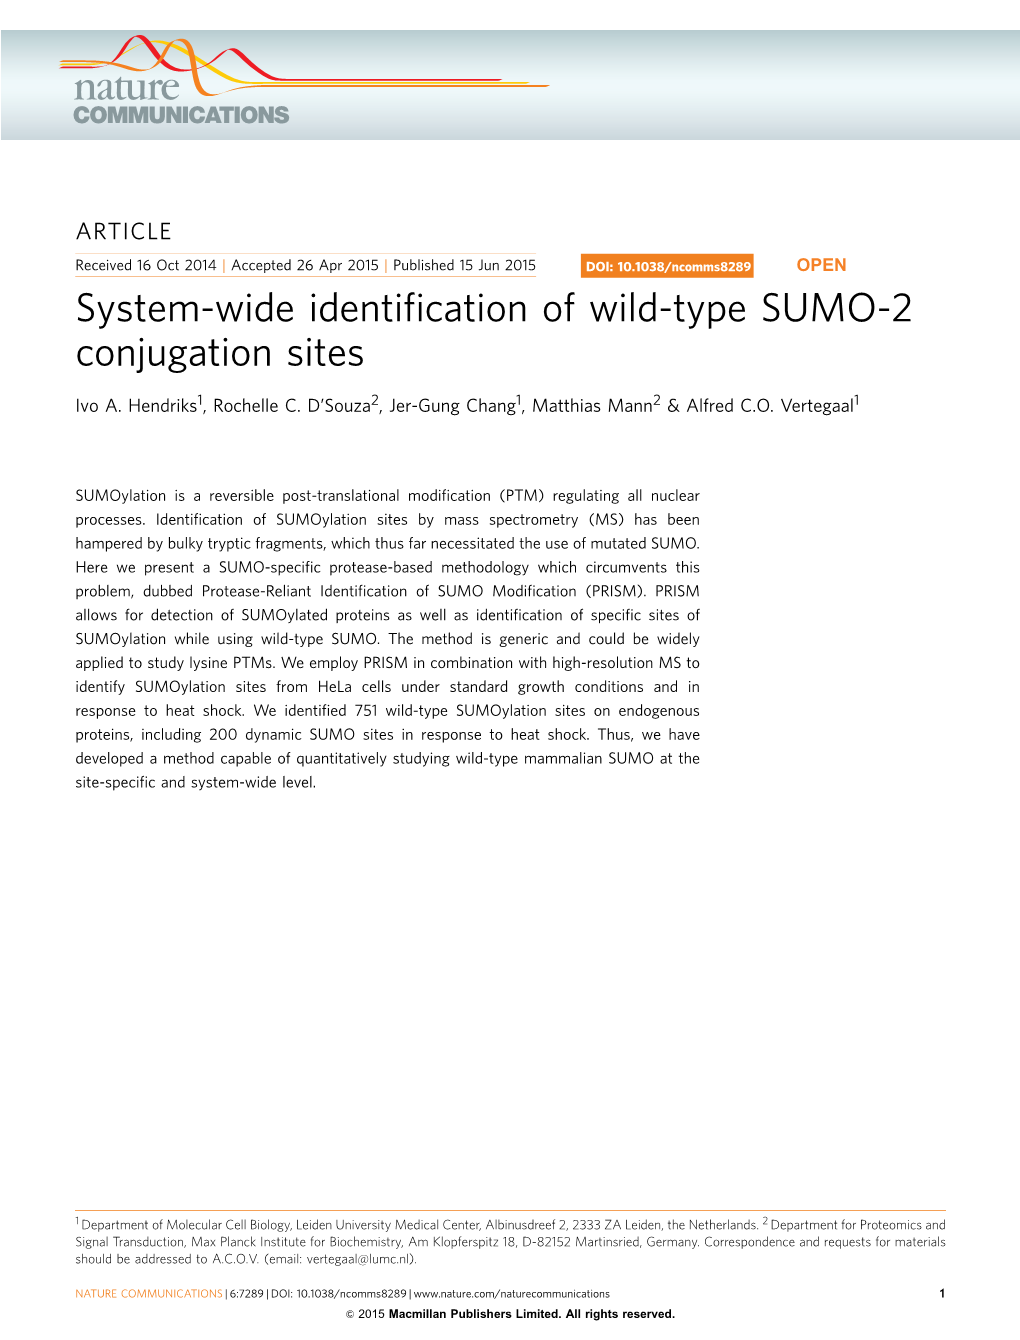 System-Wide Identification of Wild-Type SUMO-2 Conjugation Sites